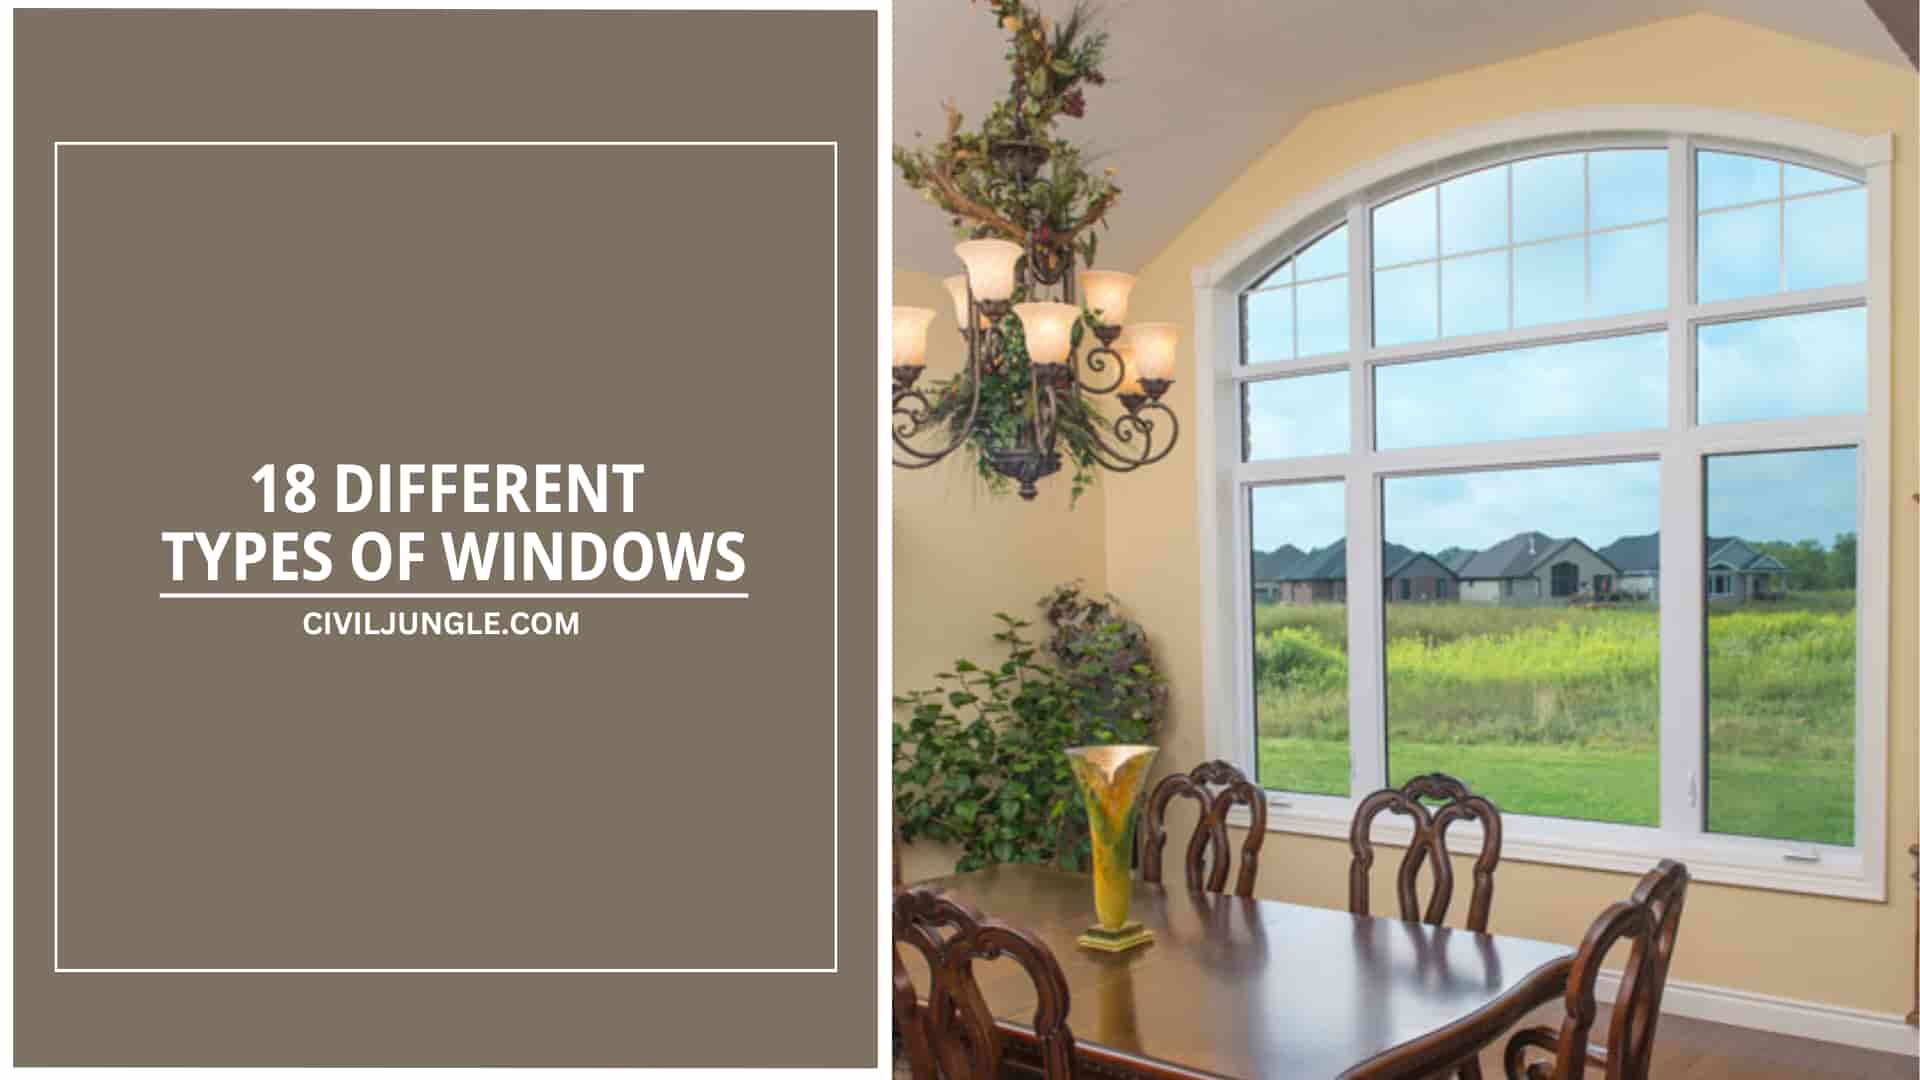 18 Different Types of Windows